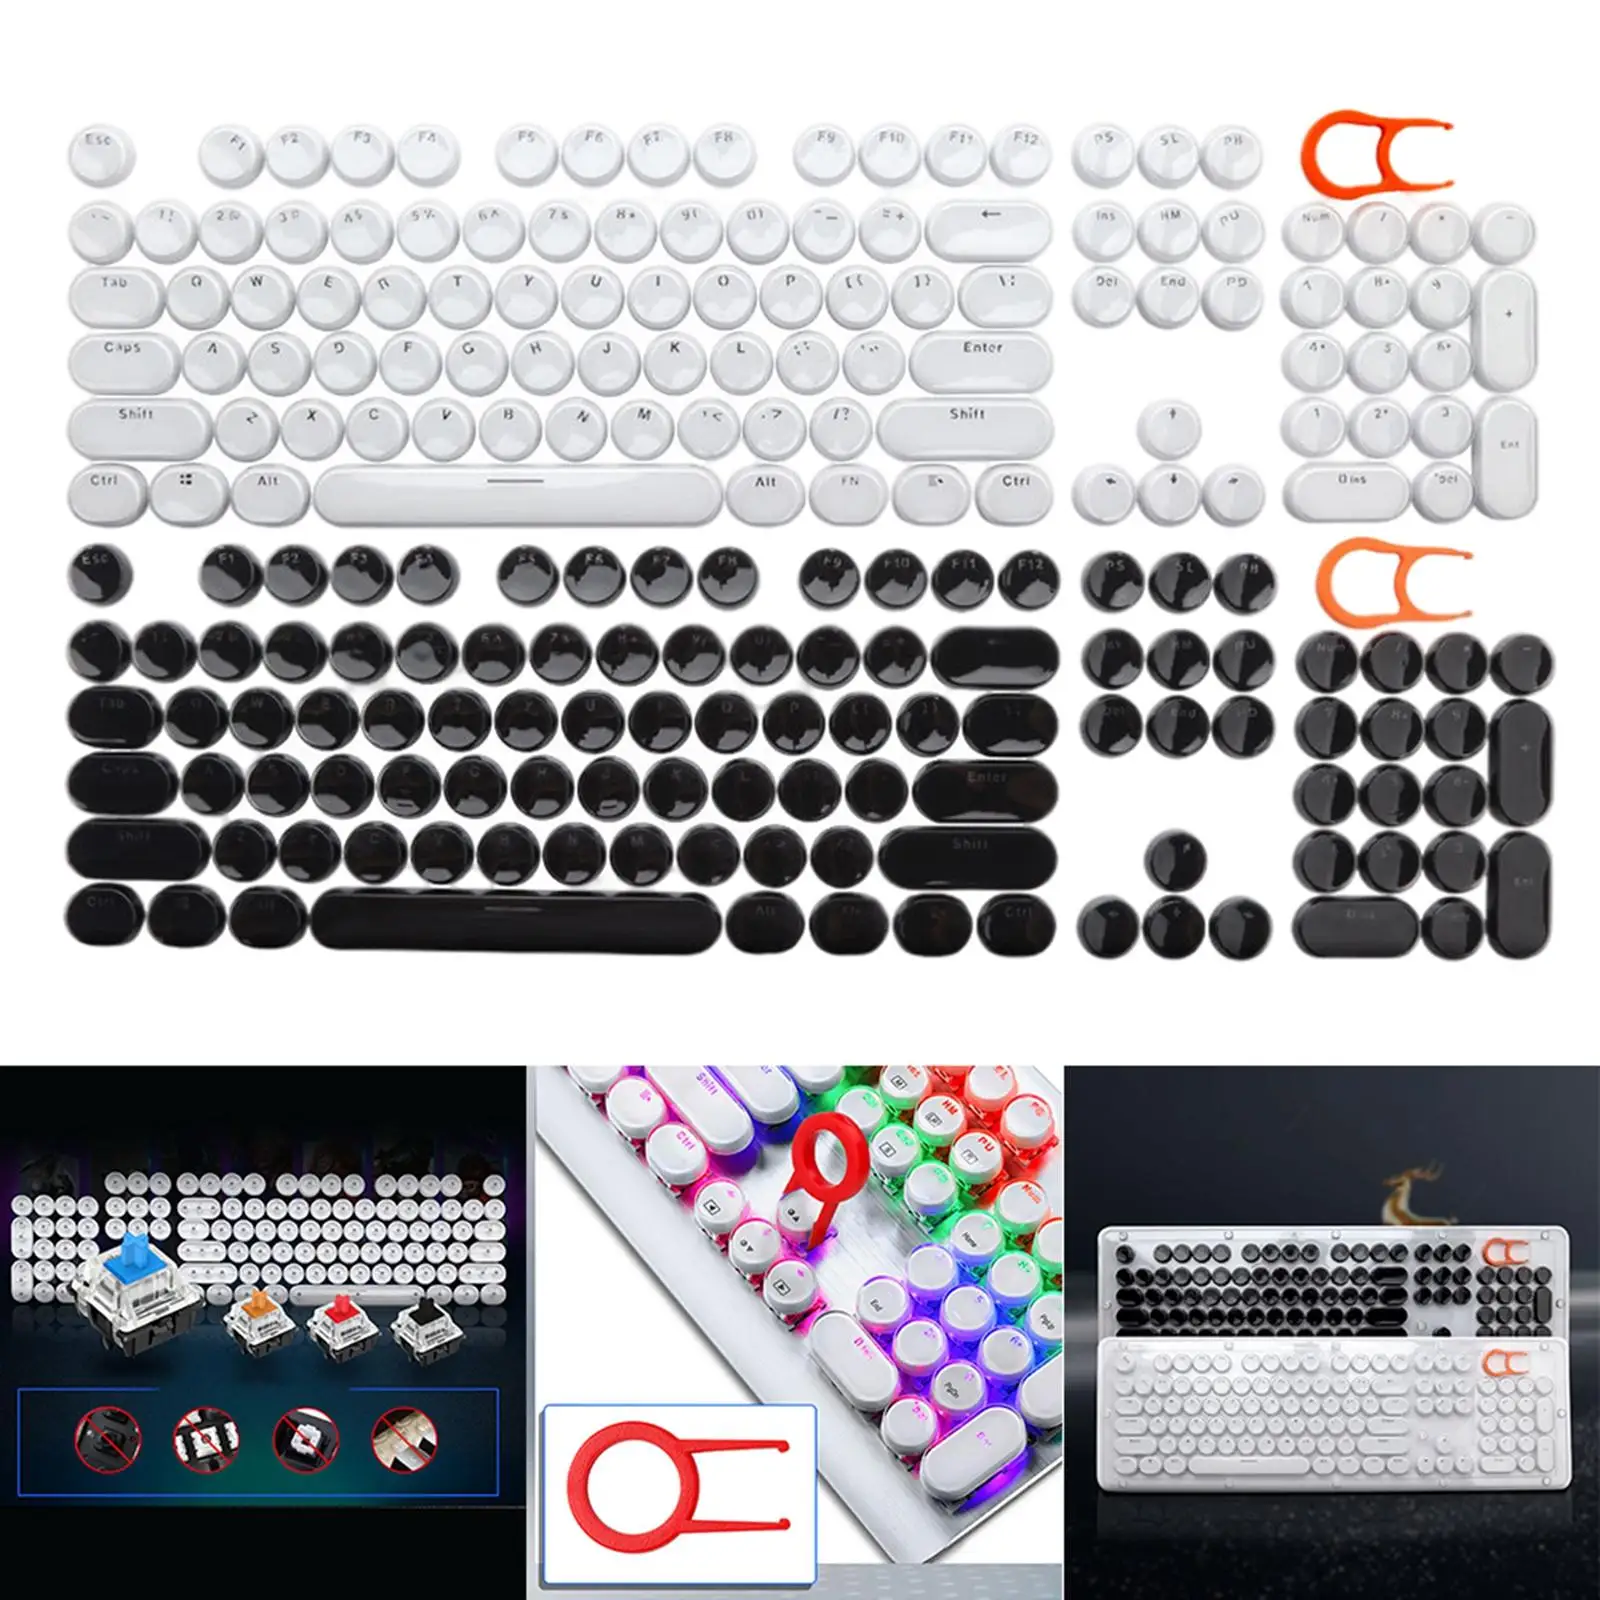 104 Pieces Typewriter Keycaps Round Steampunk Retro Style Gaming Keyboard Keycaps Mechanical Keycaps Keycaps for Computer Office